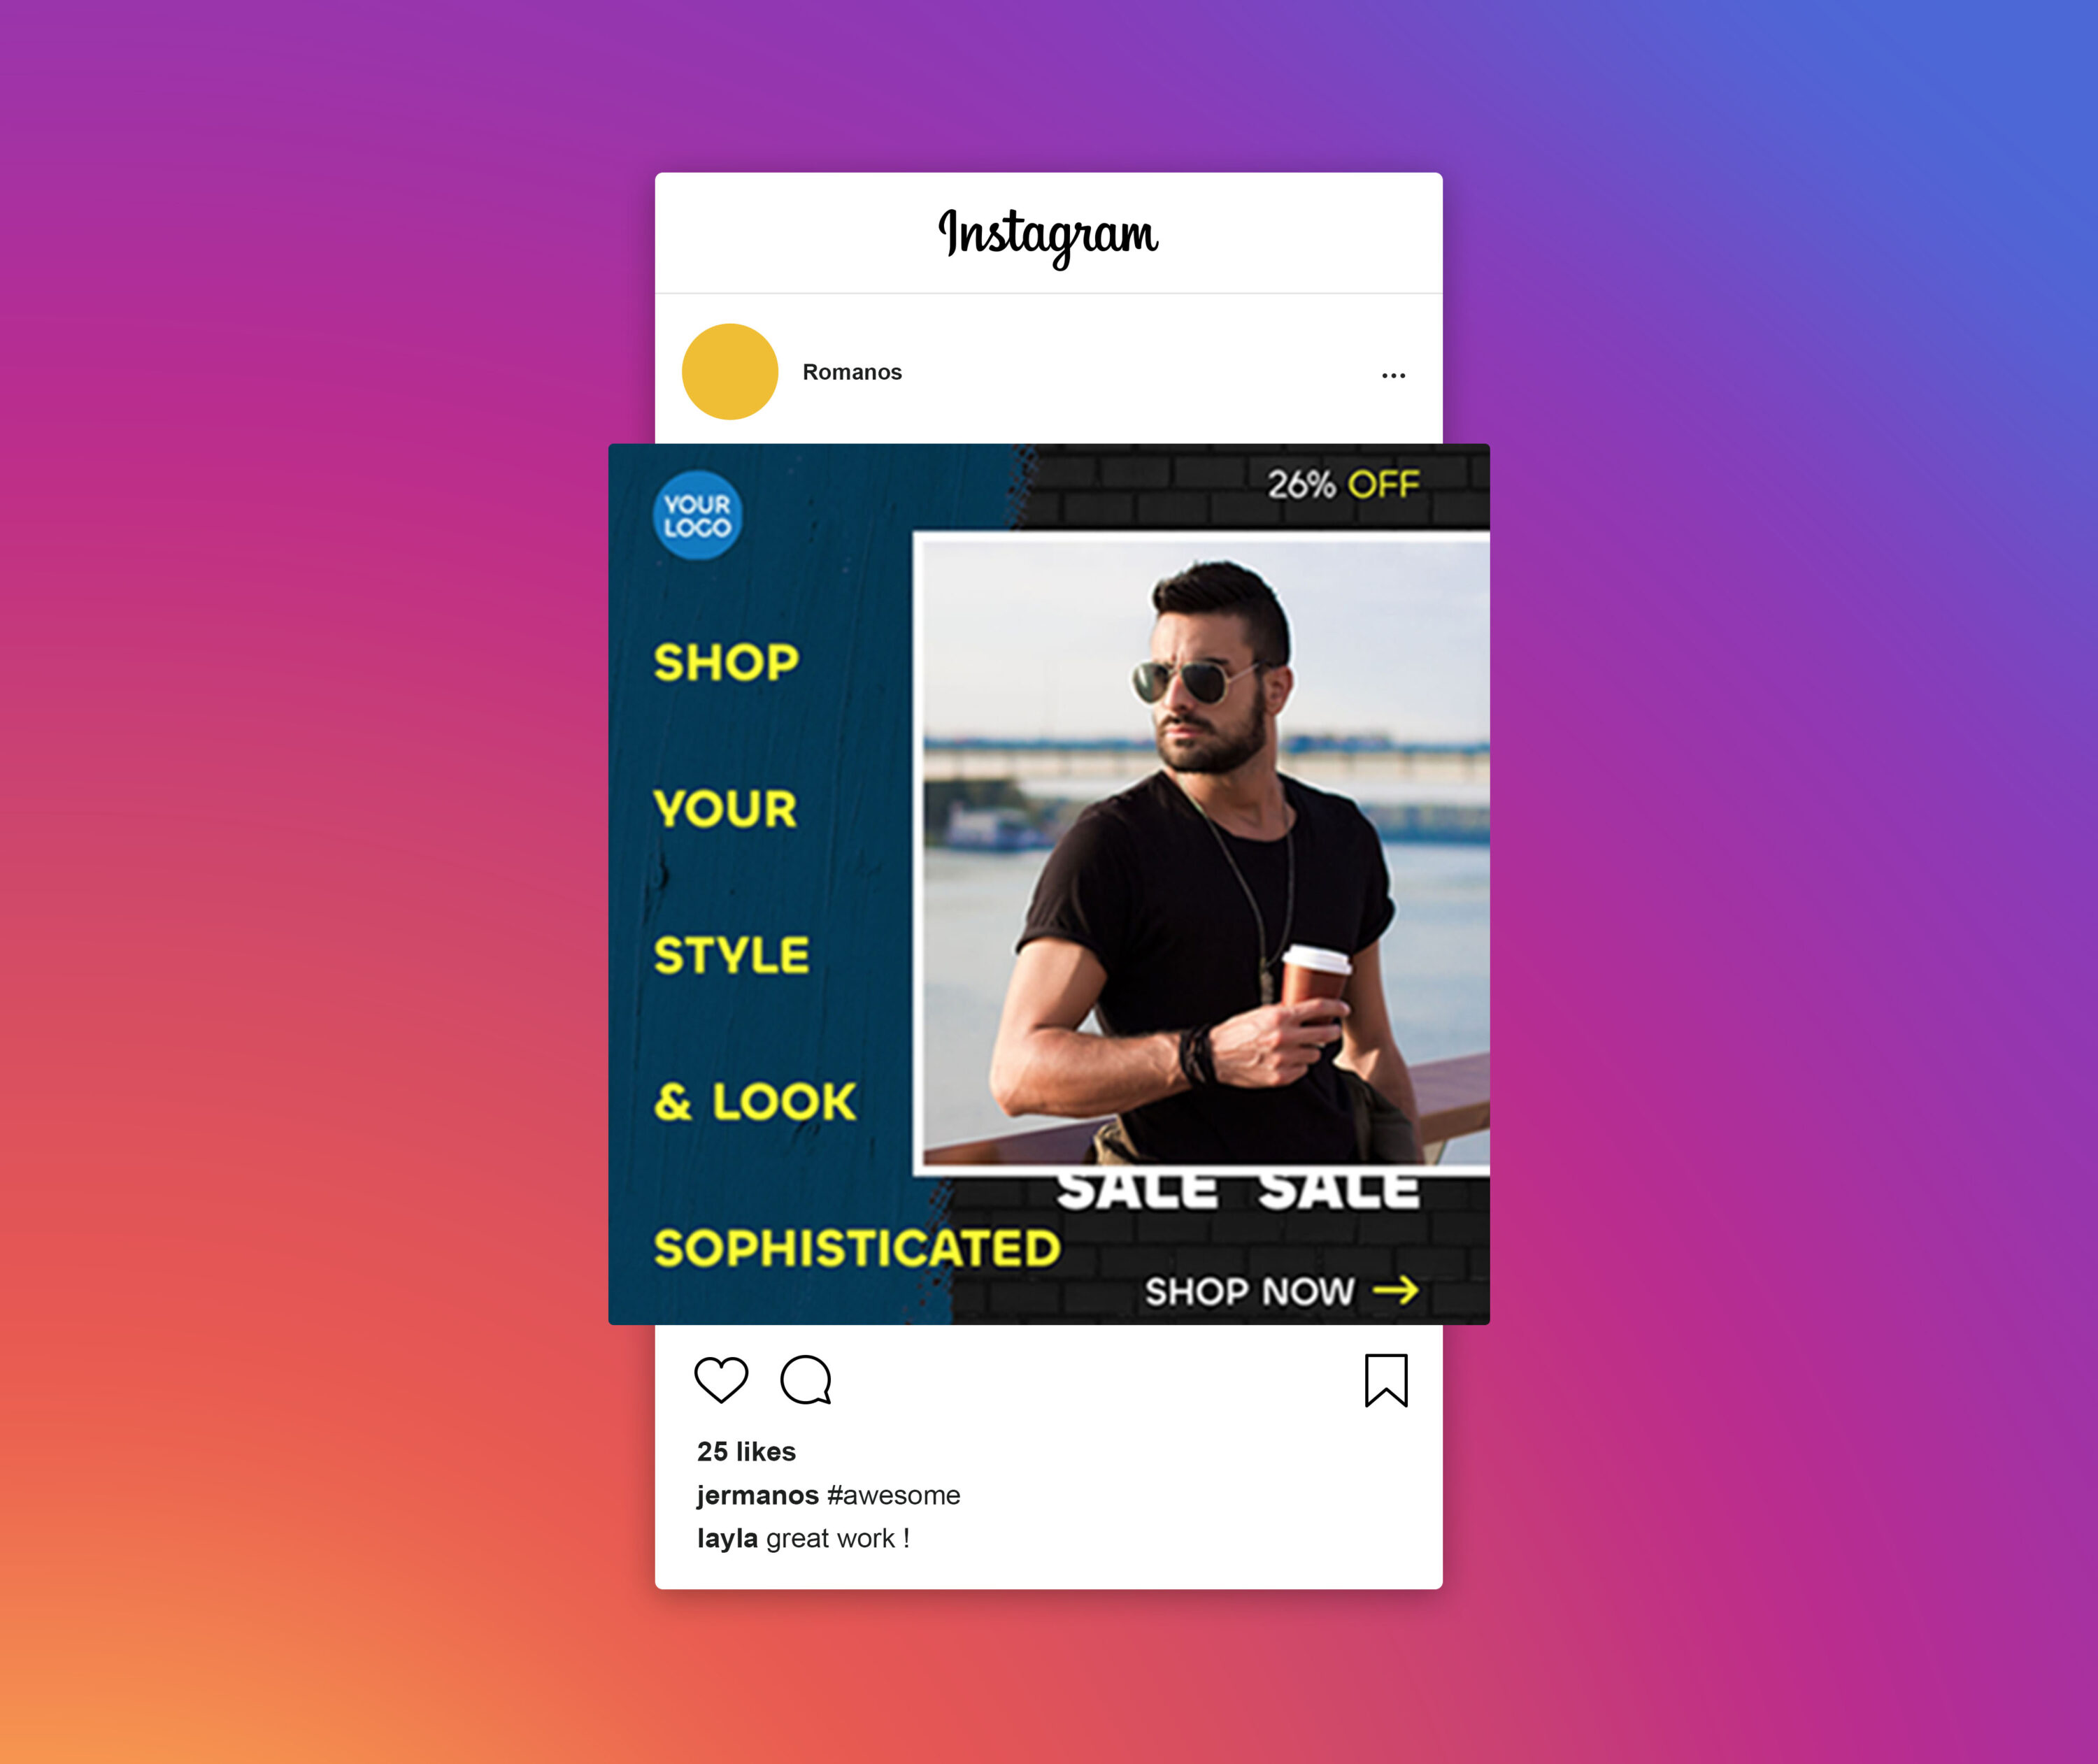 Sale And Fashion - Social Media Post Bundle Tamplates For Instagram Example.